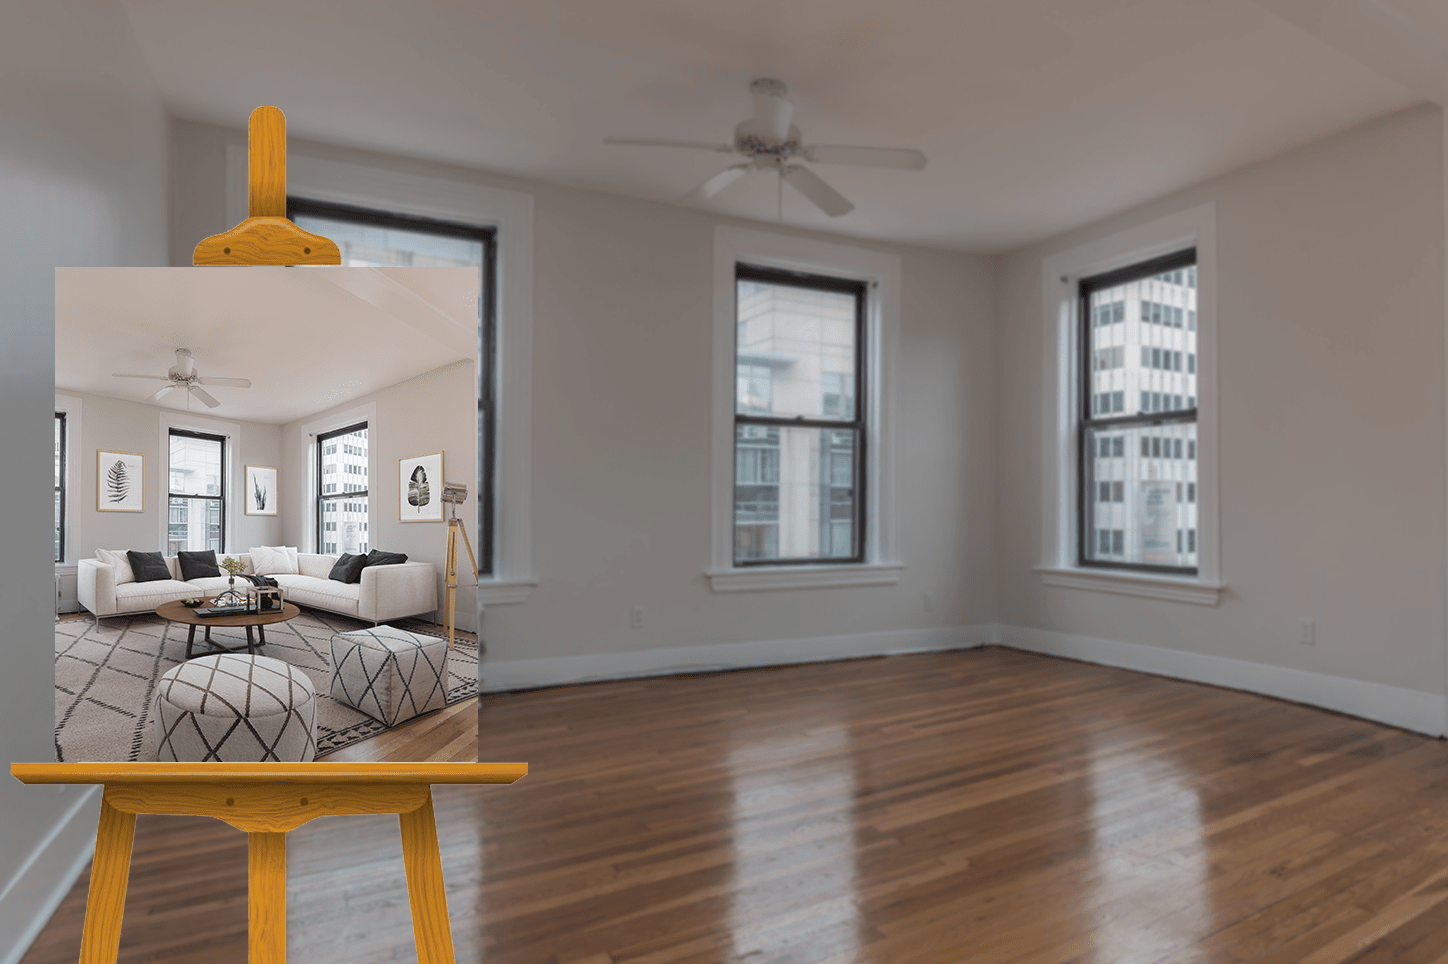 Virtual staging in real life